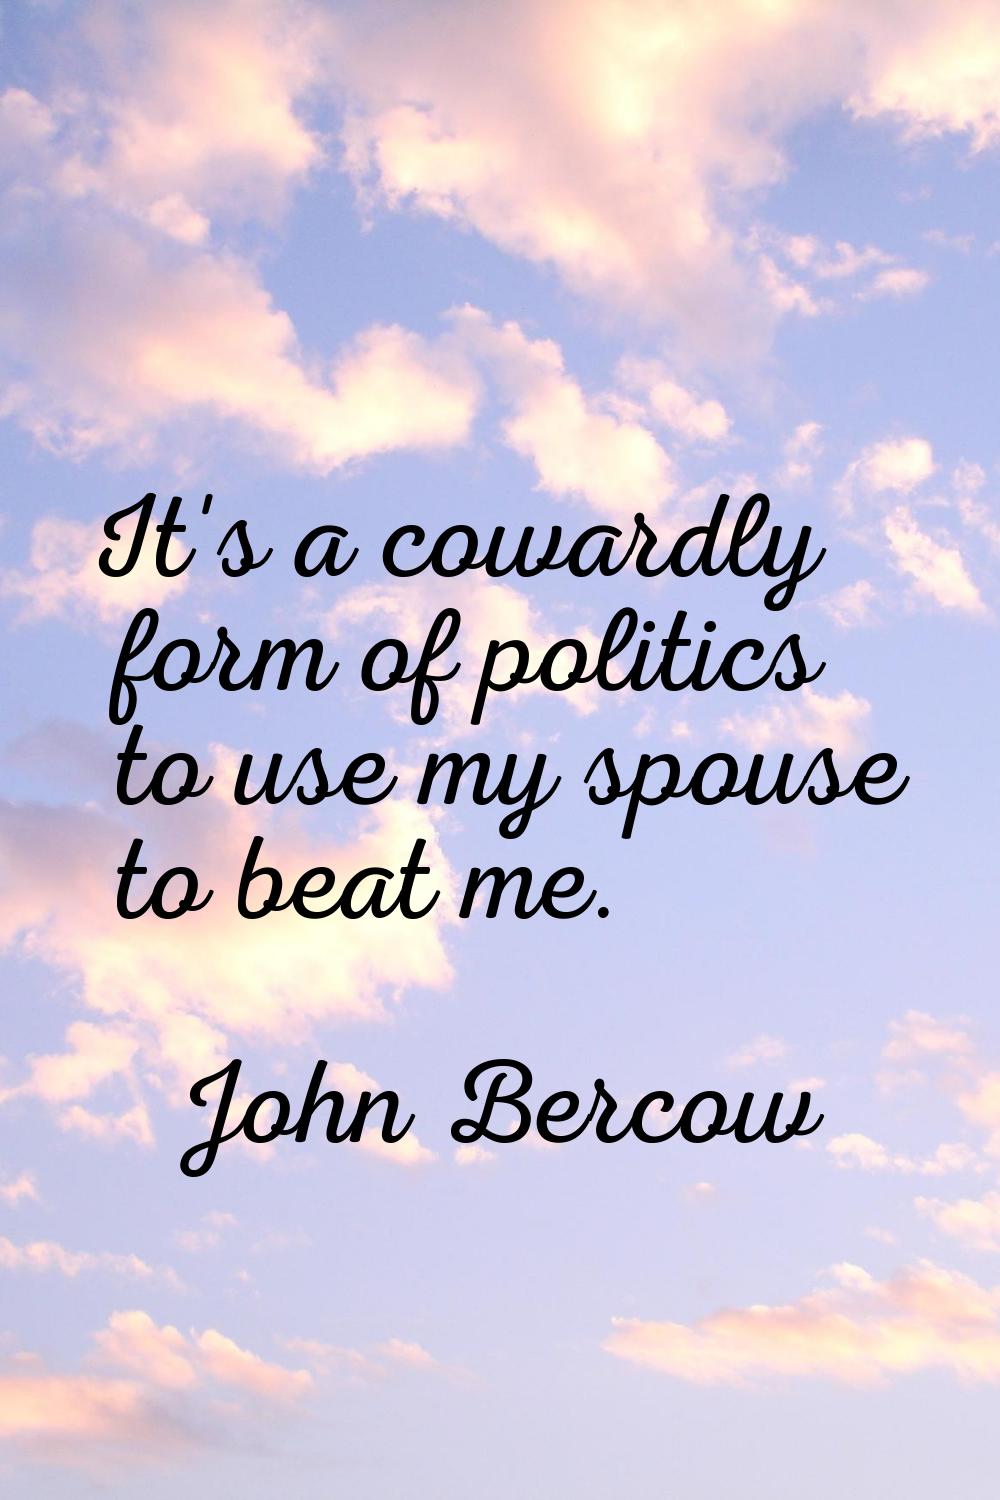 It's a cowardly form of politics to use my spouse to beat me.